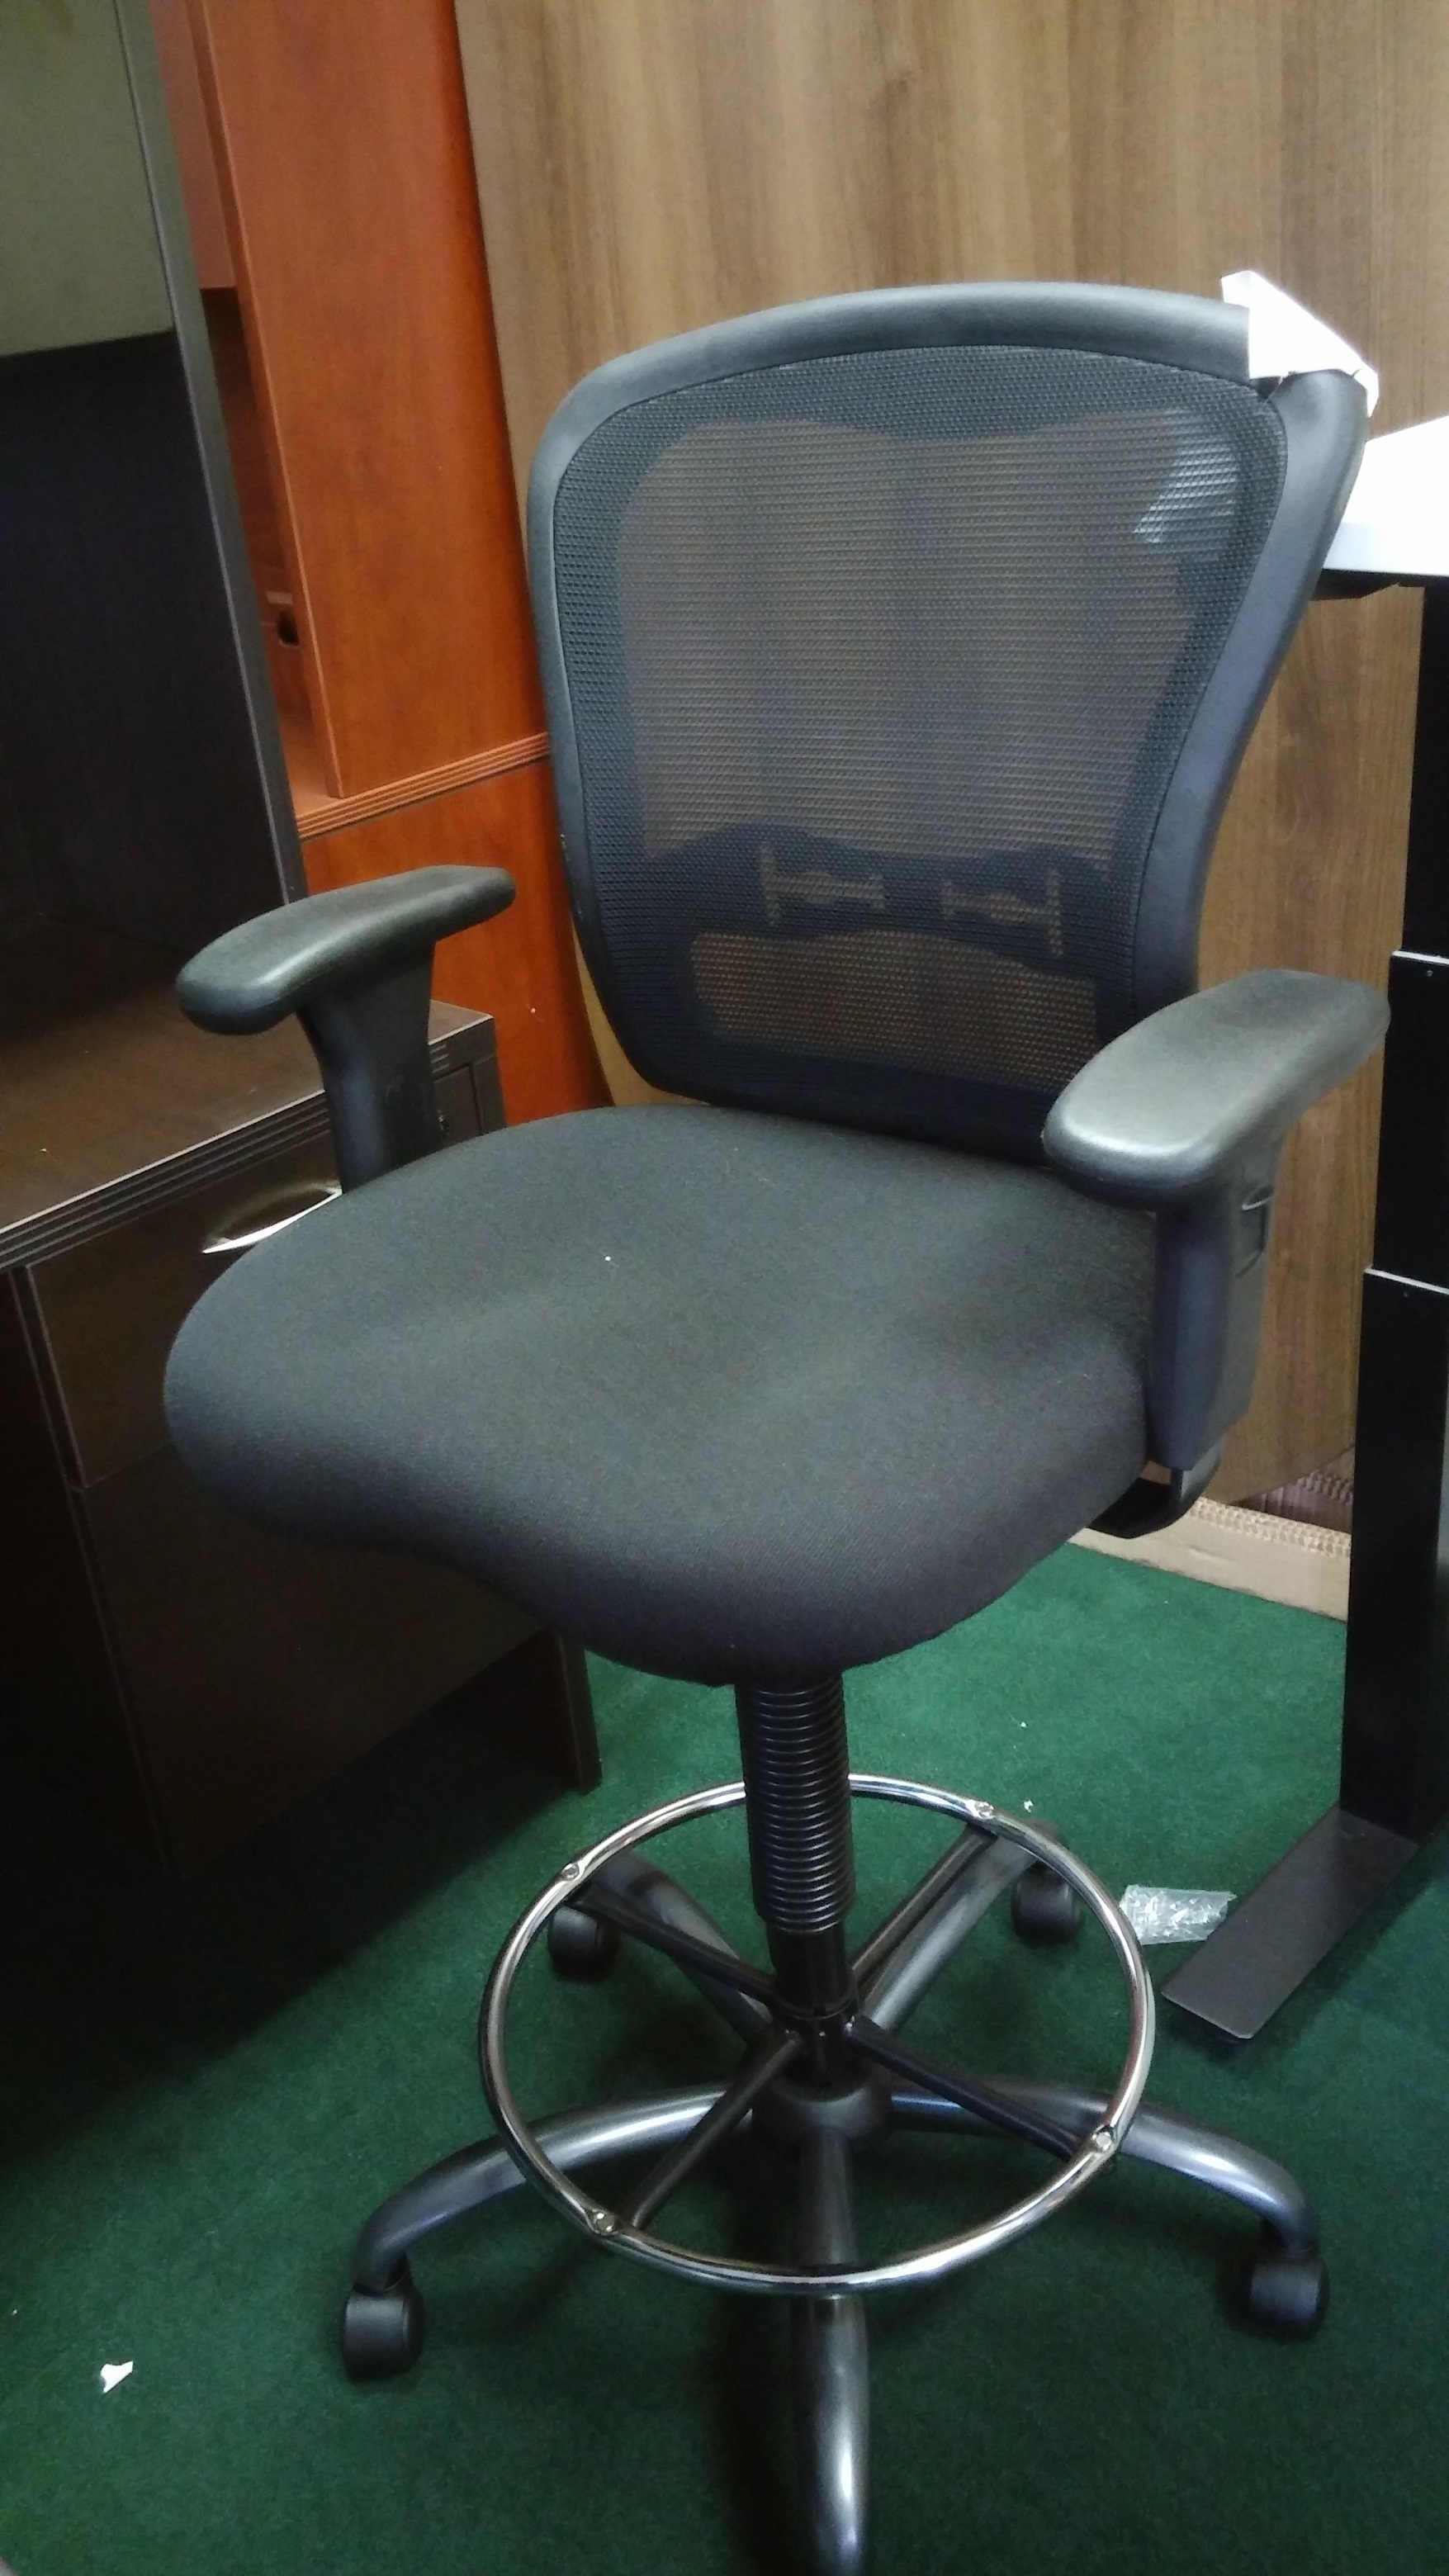 Adjustable height drafting stool with mesh back